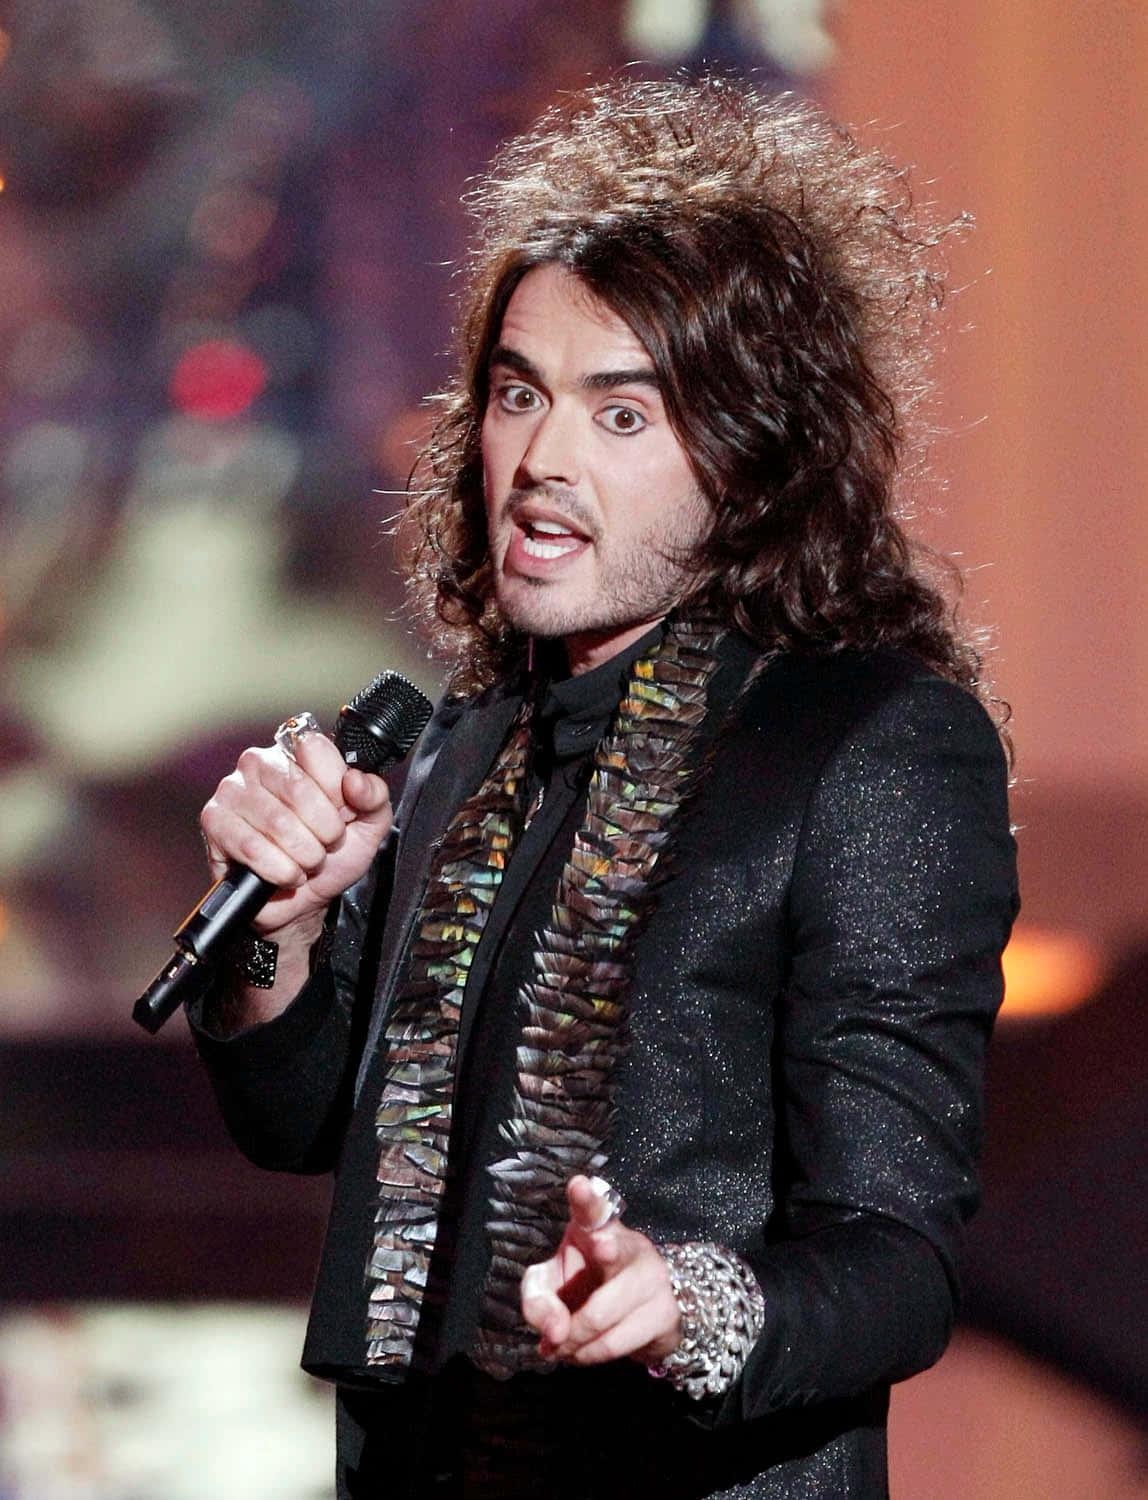 Russell Brand Enthralling Audience With His Stand-up Comedy Wallpaper